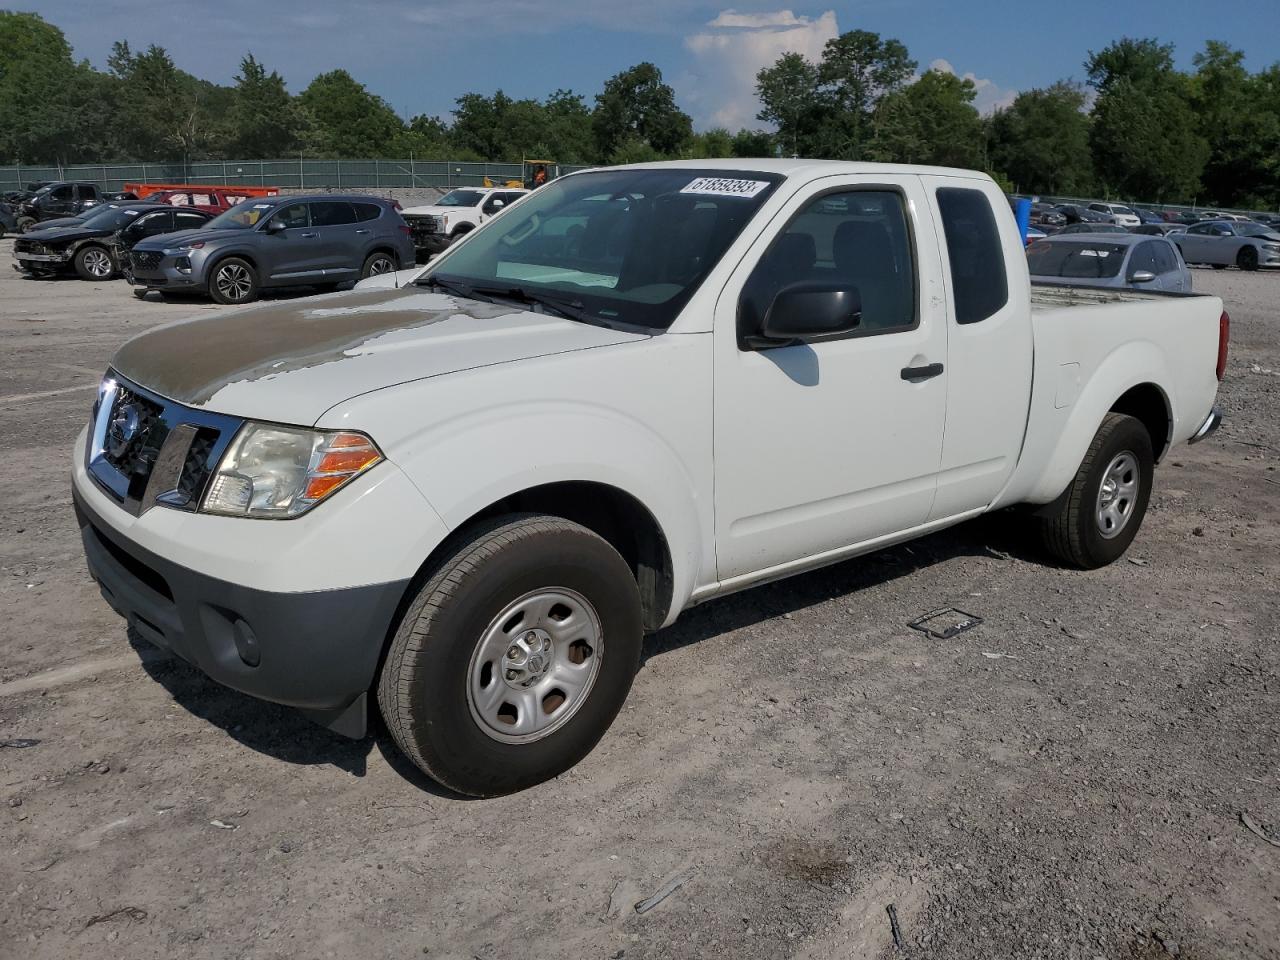 vin: 1N6BD0CT0DN733352 1N6BD0CT0DN733352 2013 nissan navara (frontier) 2500 for Sale in 37354 6763, Tn - Knoxville, Madisonville, USA